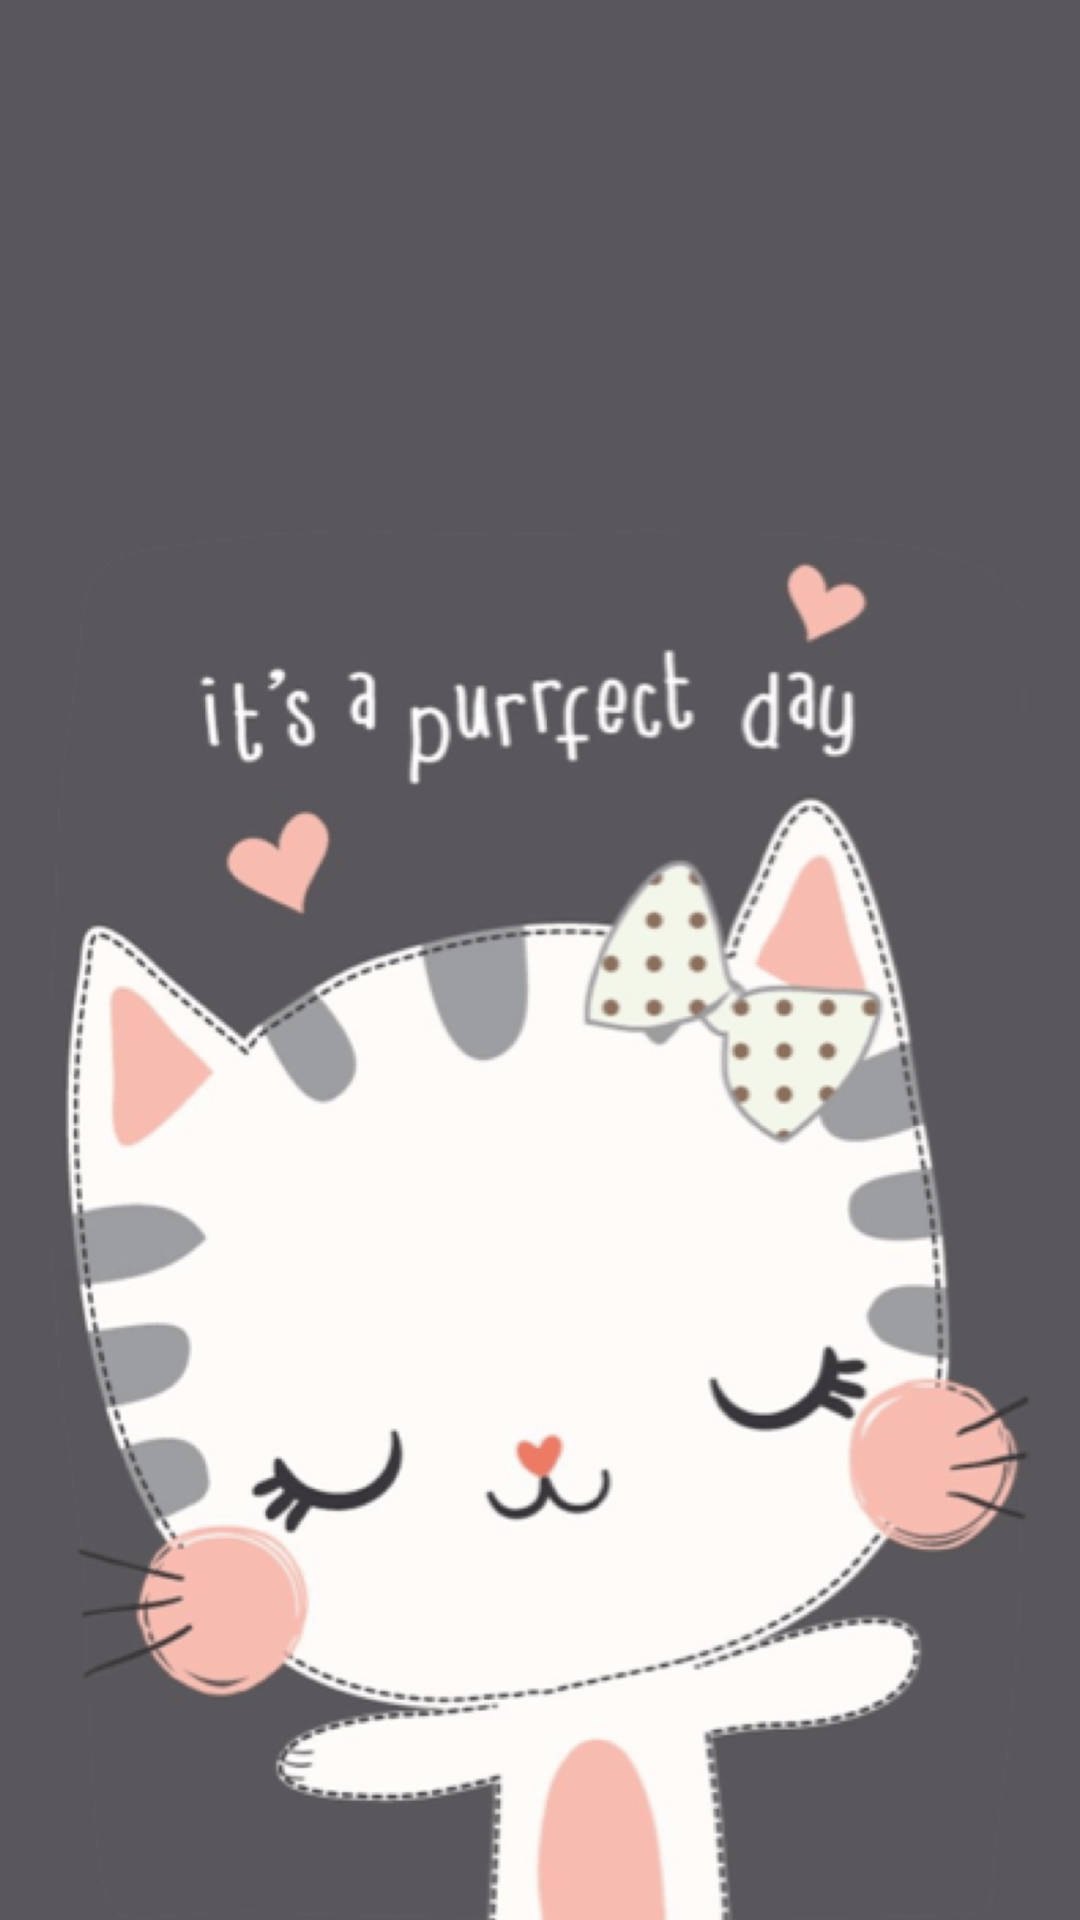 "A Purrfect Day with Cartoon Cat" Wallpaper